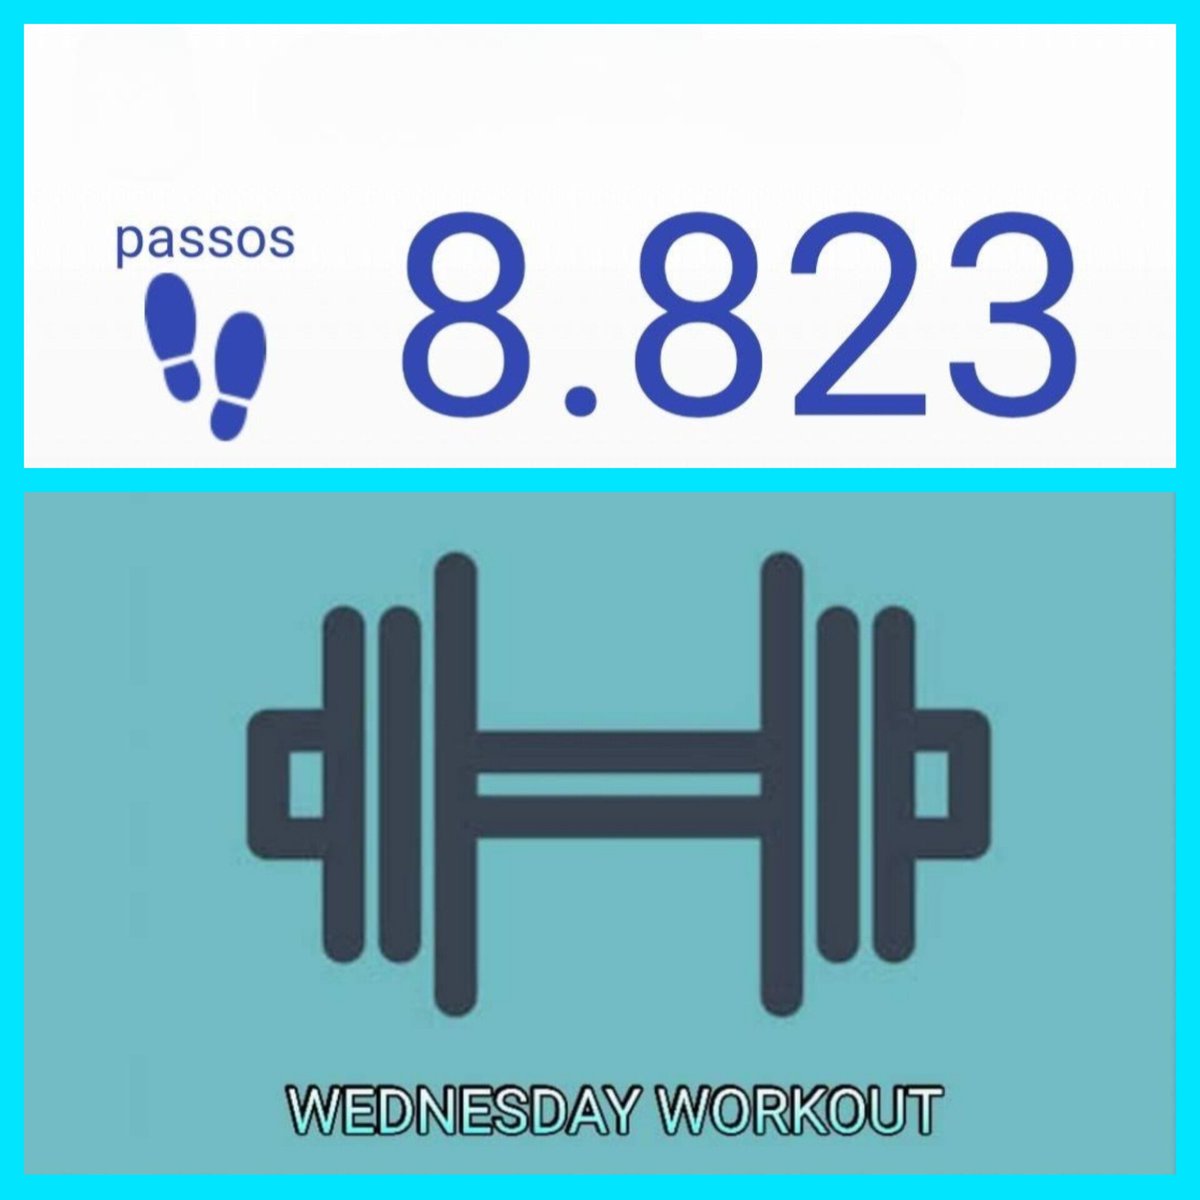 Wednesday workout done with street walking  #Livinghealthy #Gyminhome #Goals #Motivation #Makeitahabbit